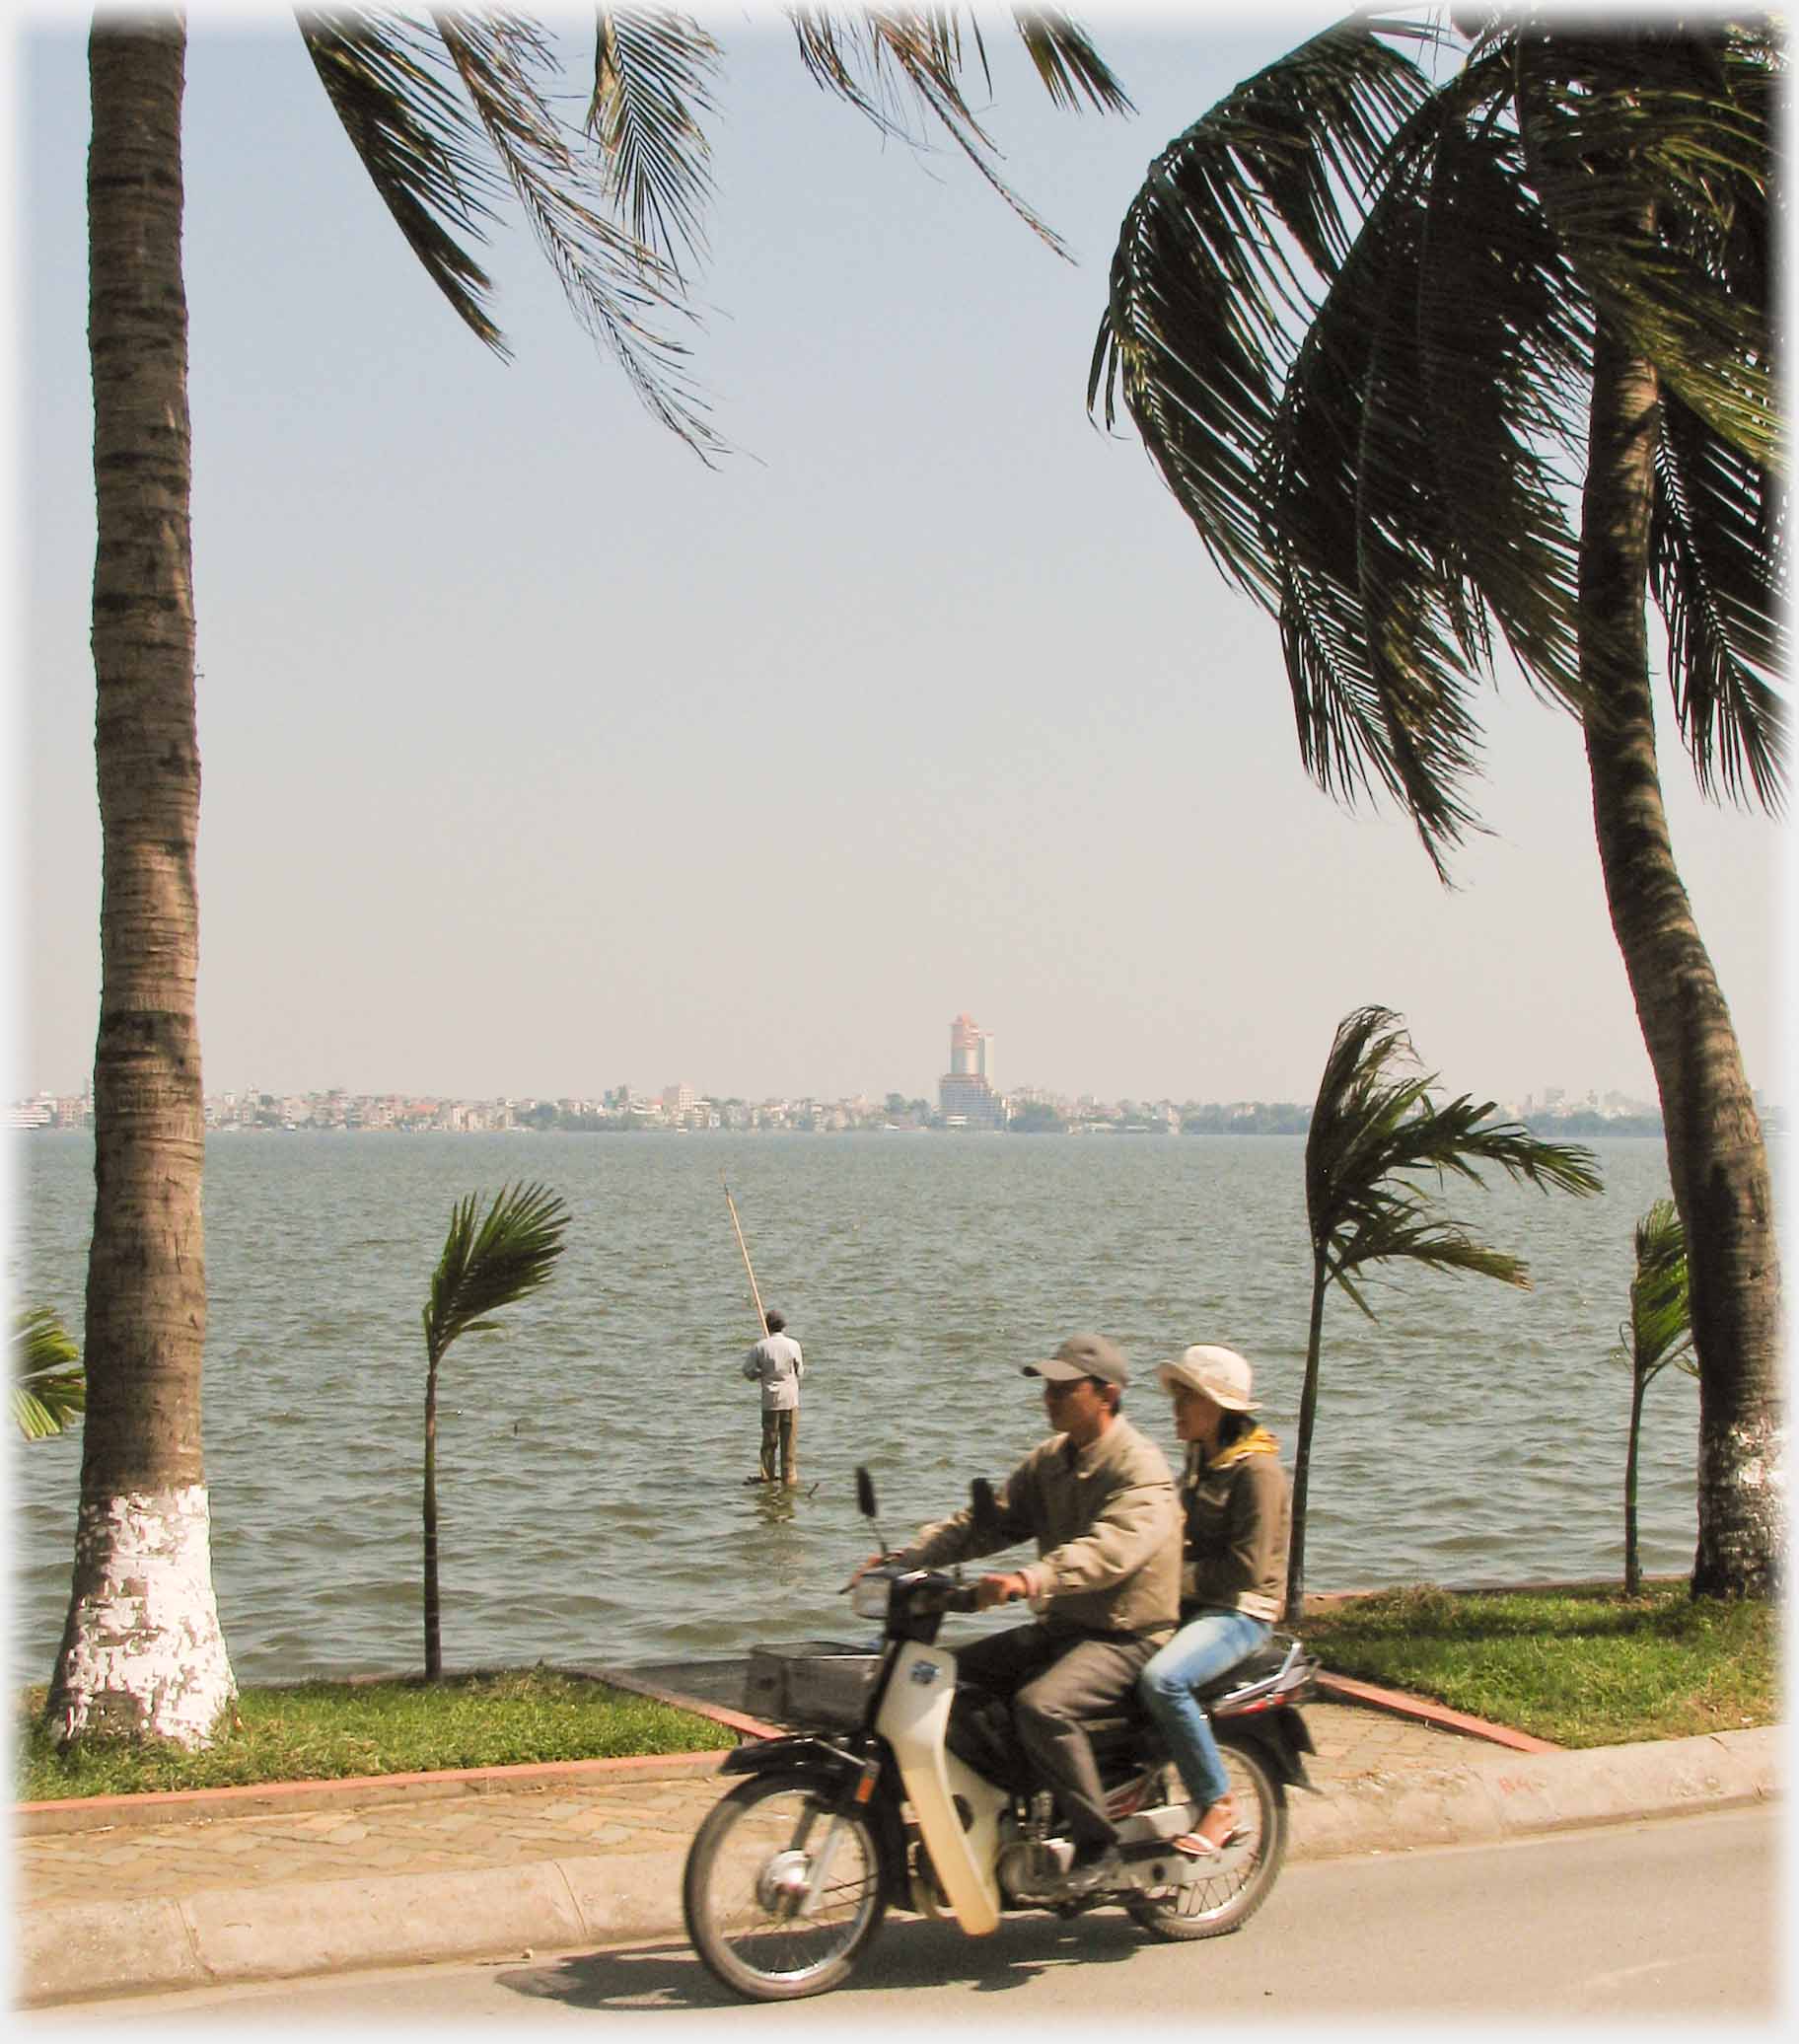 Couple on motorbike passing trees and fisherman.